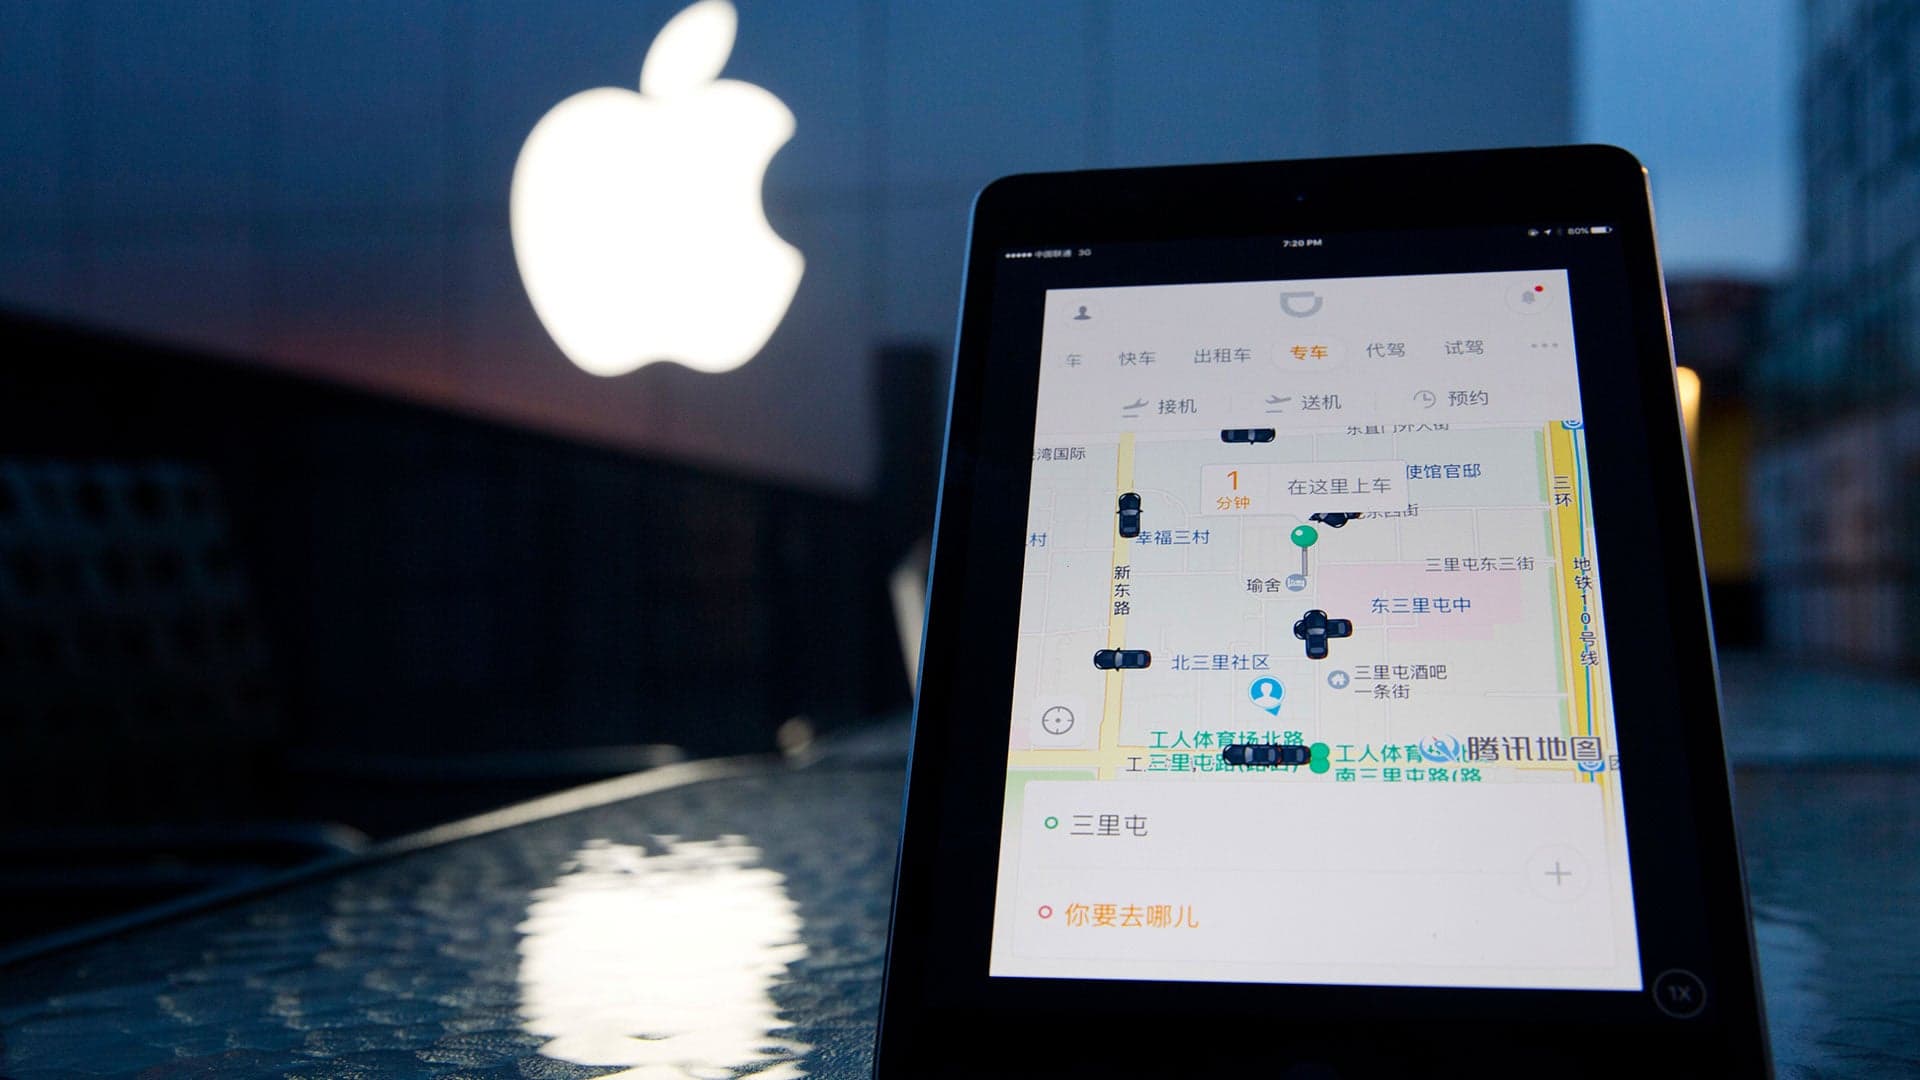 Apple Just Bought $1 Billion of China’s Uber Competitor